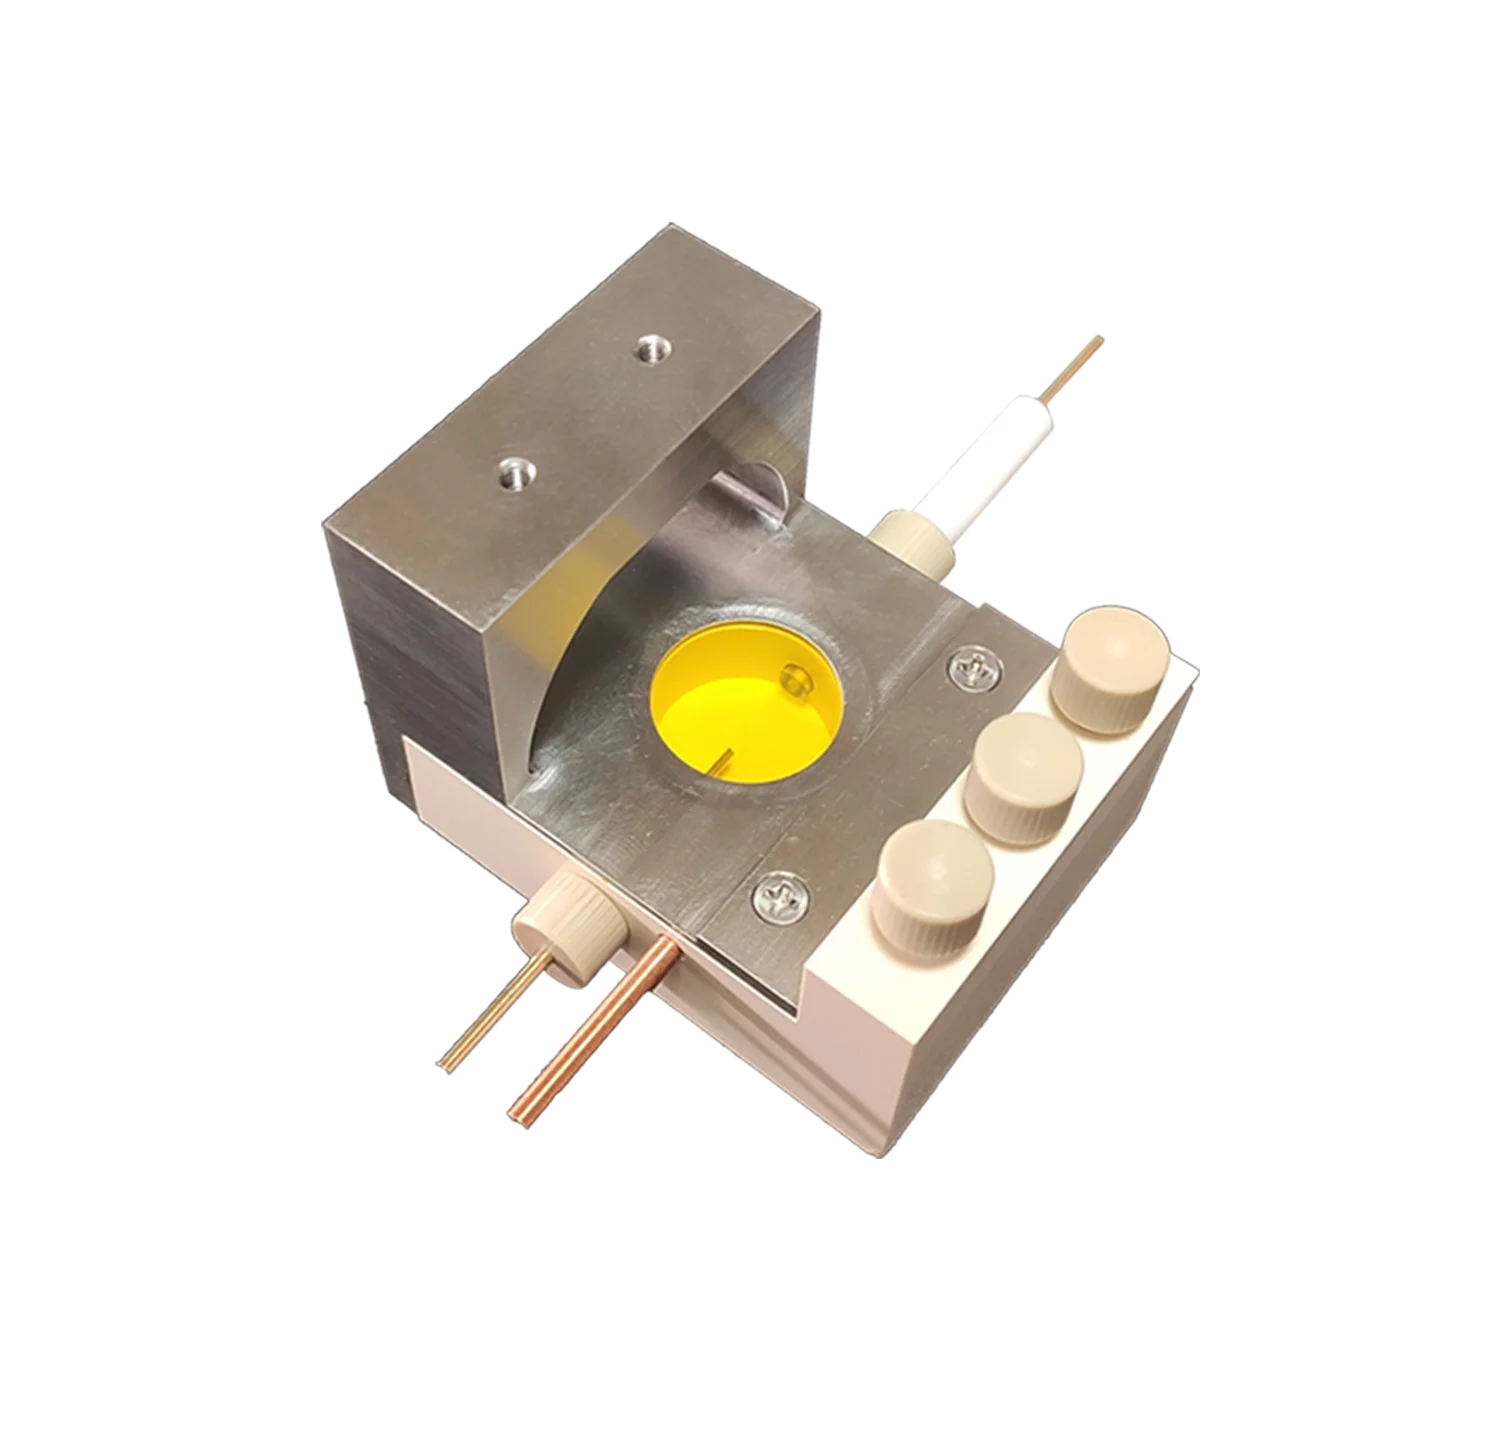 In-situ Reaction Device